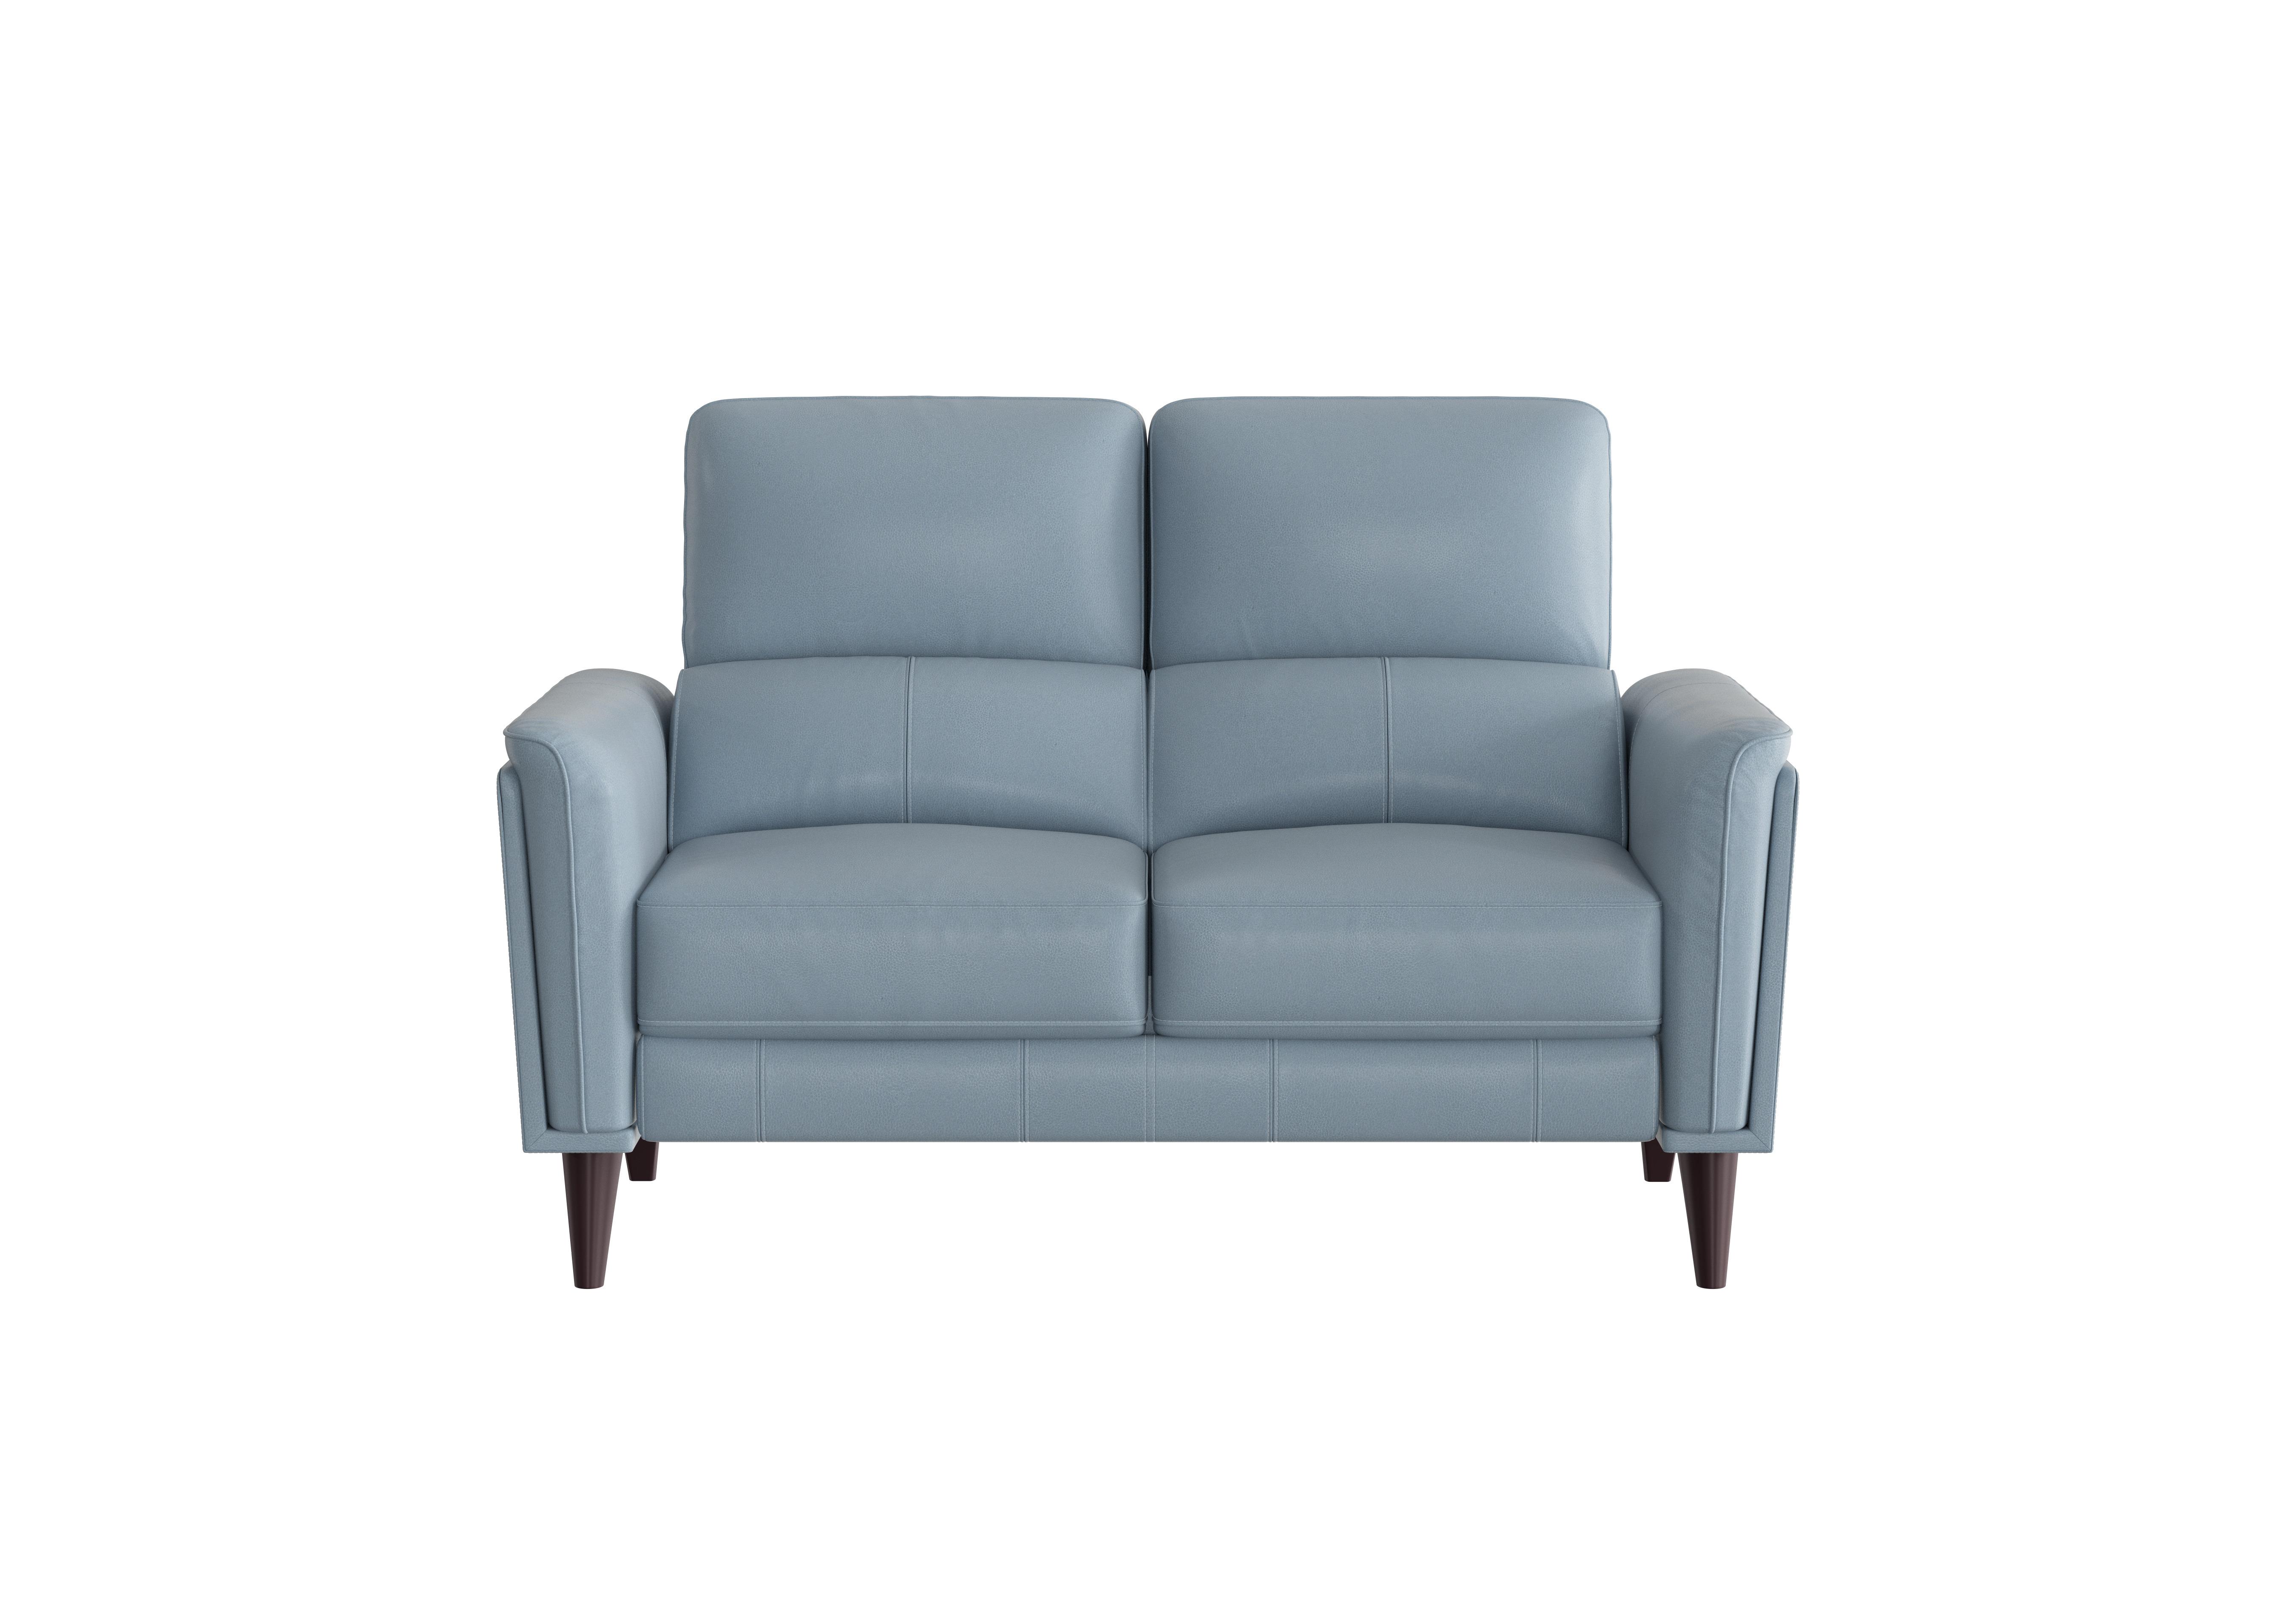 Compact Collection Klein 2 Seater Leather Sofa in Nc-026e Pearl Blue on Furniture Village